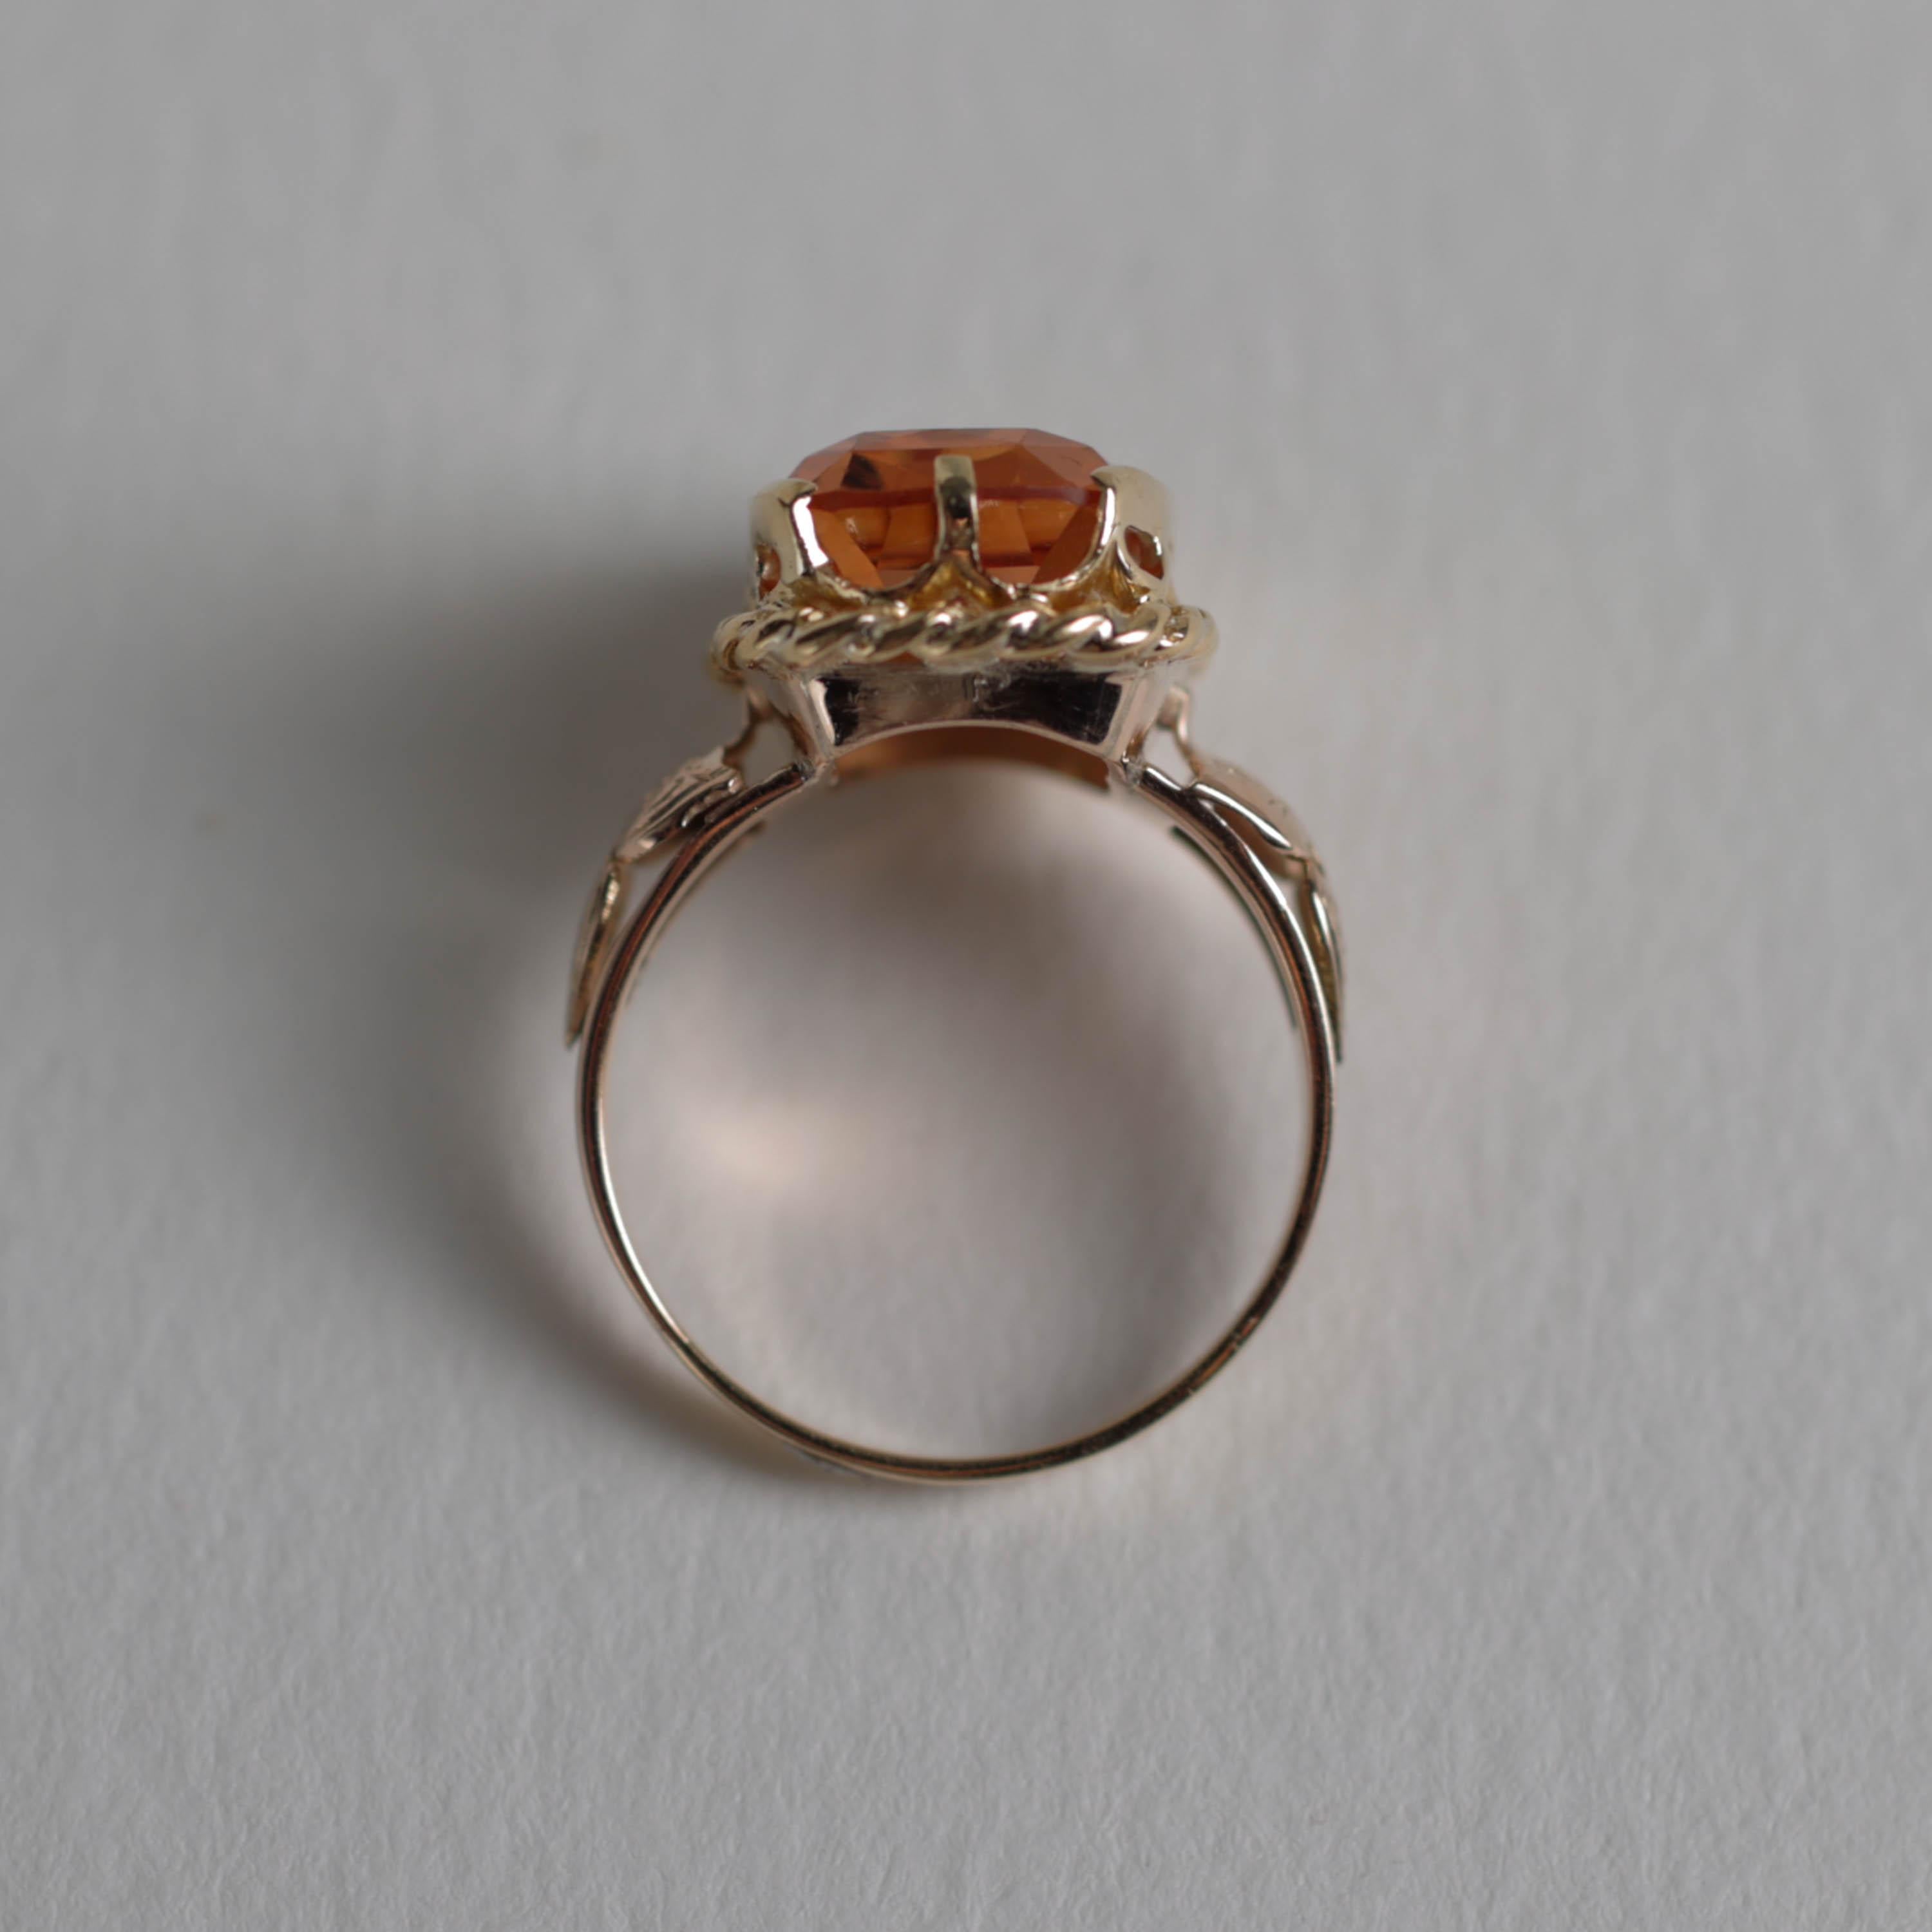 Imperial Topaz Ring Antique Certified Untreated Brazil Origin Size 8.5 For Sale 1